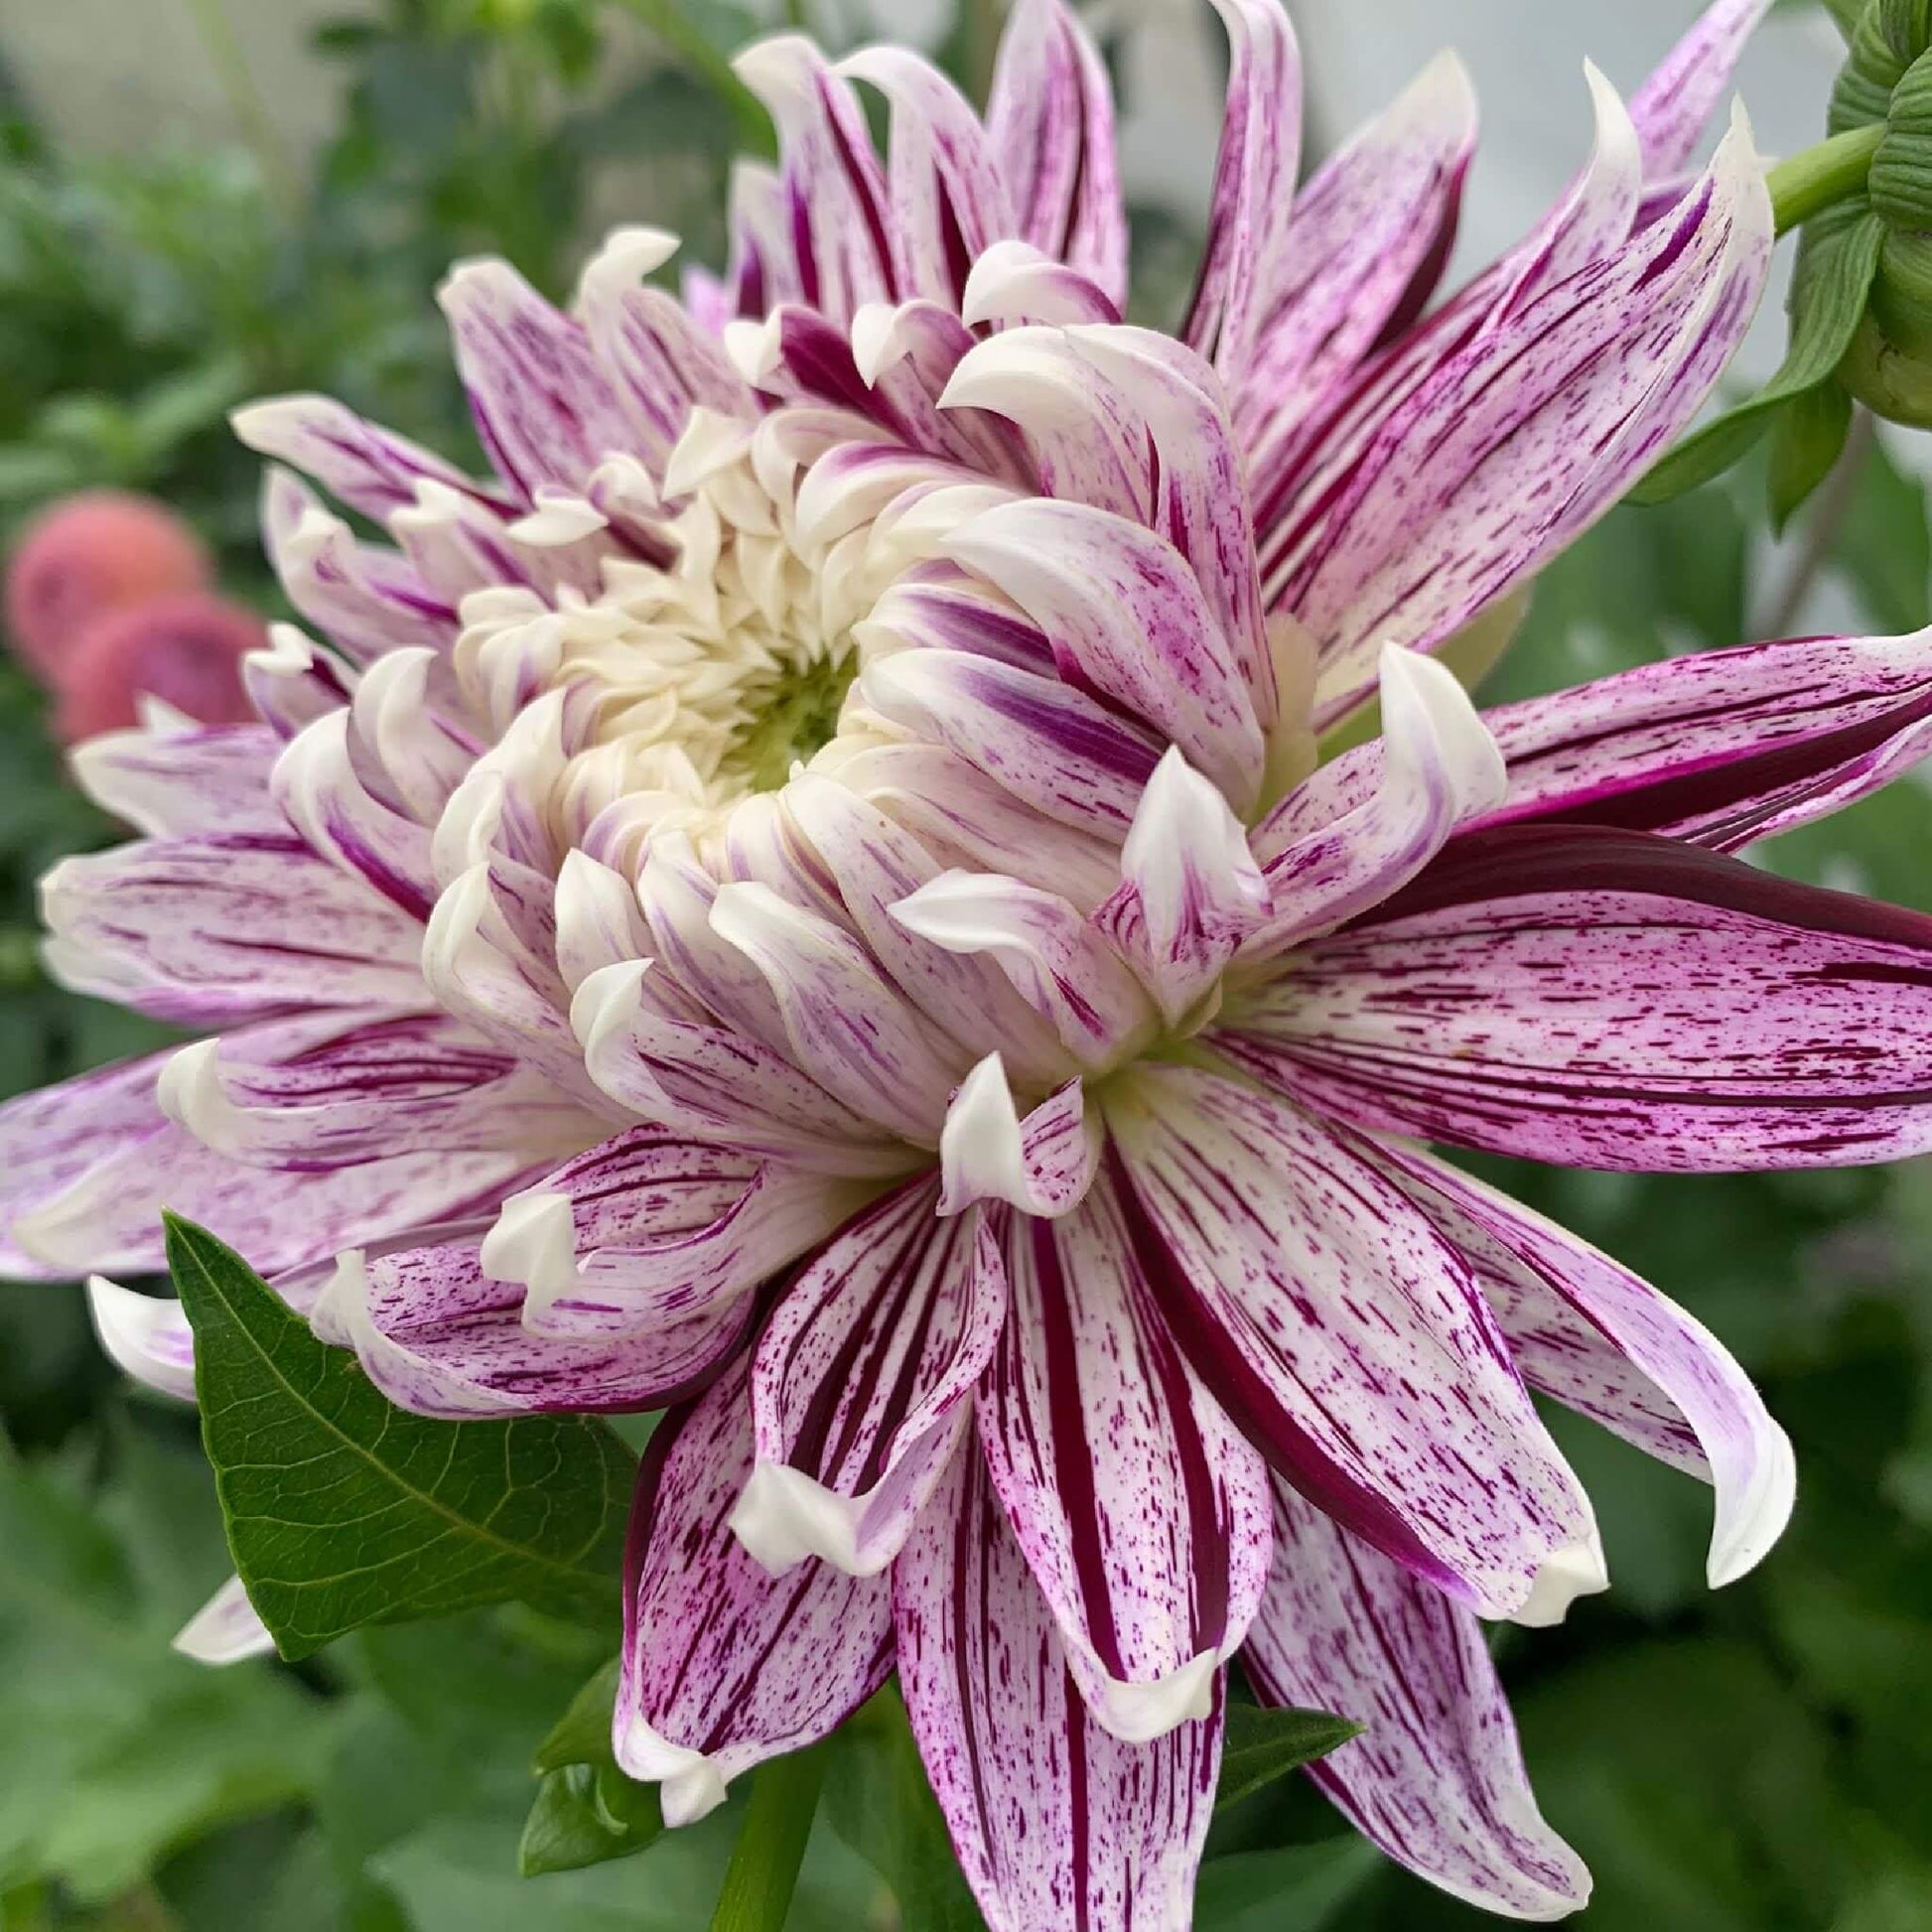 Avignon dahlia rooted cuttings for sale